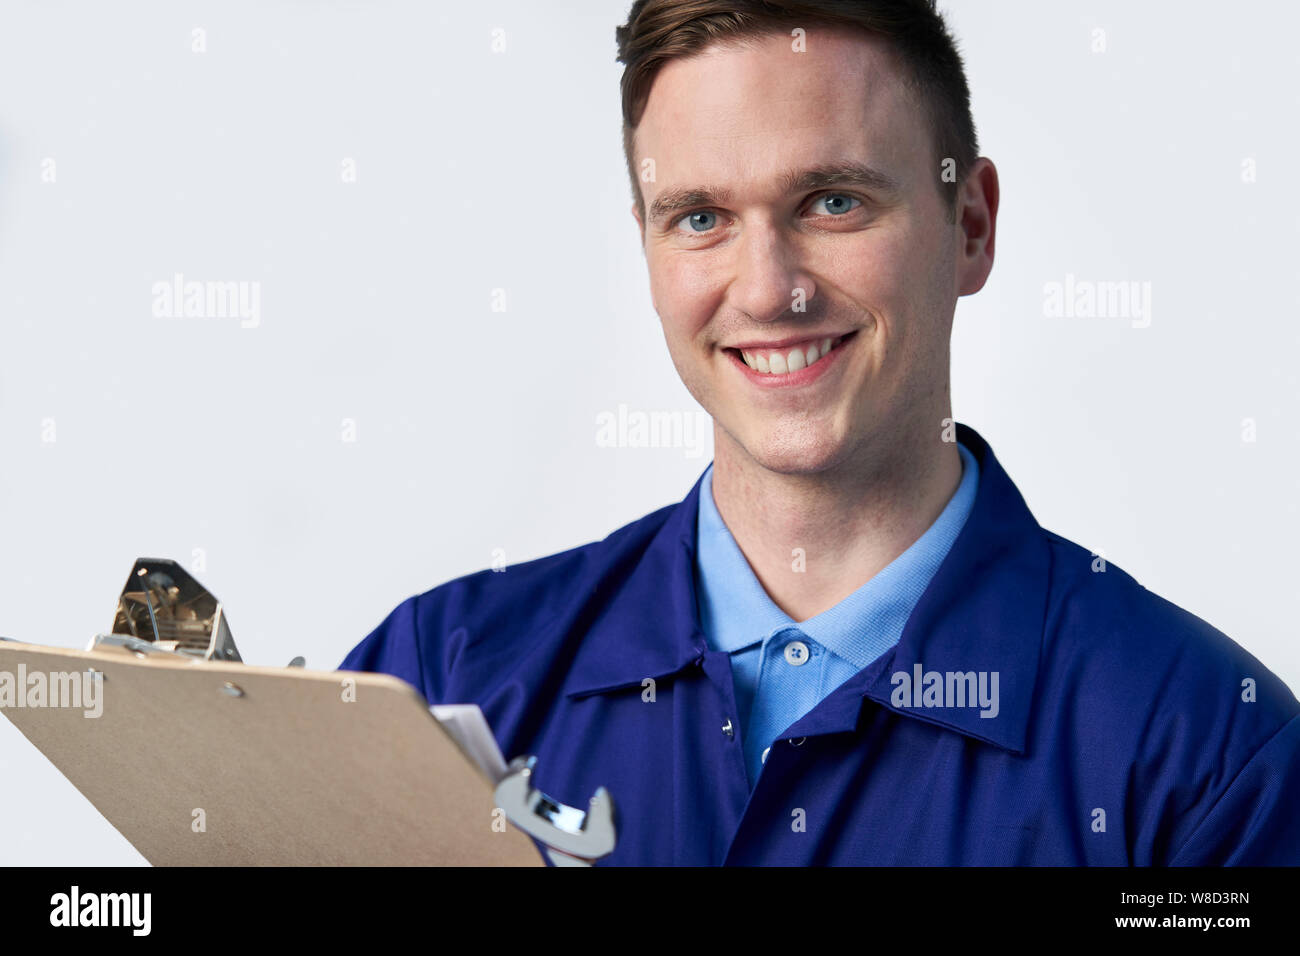 Studio Portrait Of Male Engineer With Clipboard And Spanner Against White Background Stock Photo